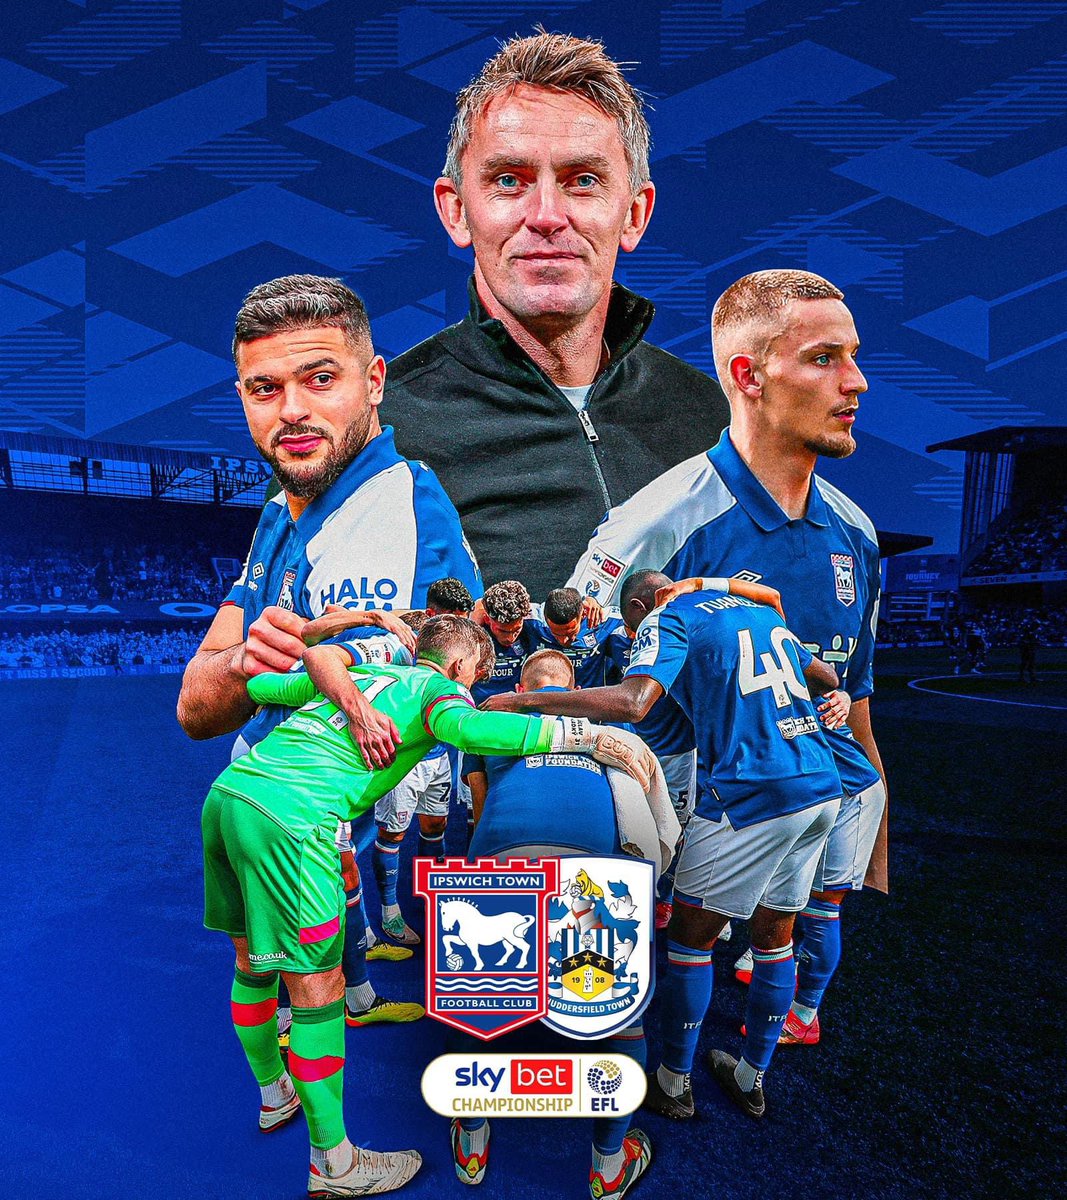 This man ! This team ! Incredible !!!! Congratulations #IpswichTown Congratulations to fans !!!! #PremierLeague here we come !!! #Promotion 👏👏👏👏👏👏🍾🍾🍾🍾